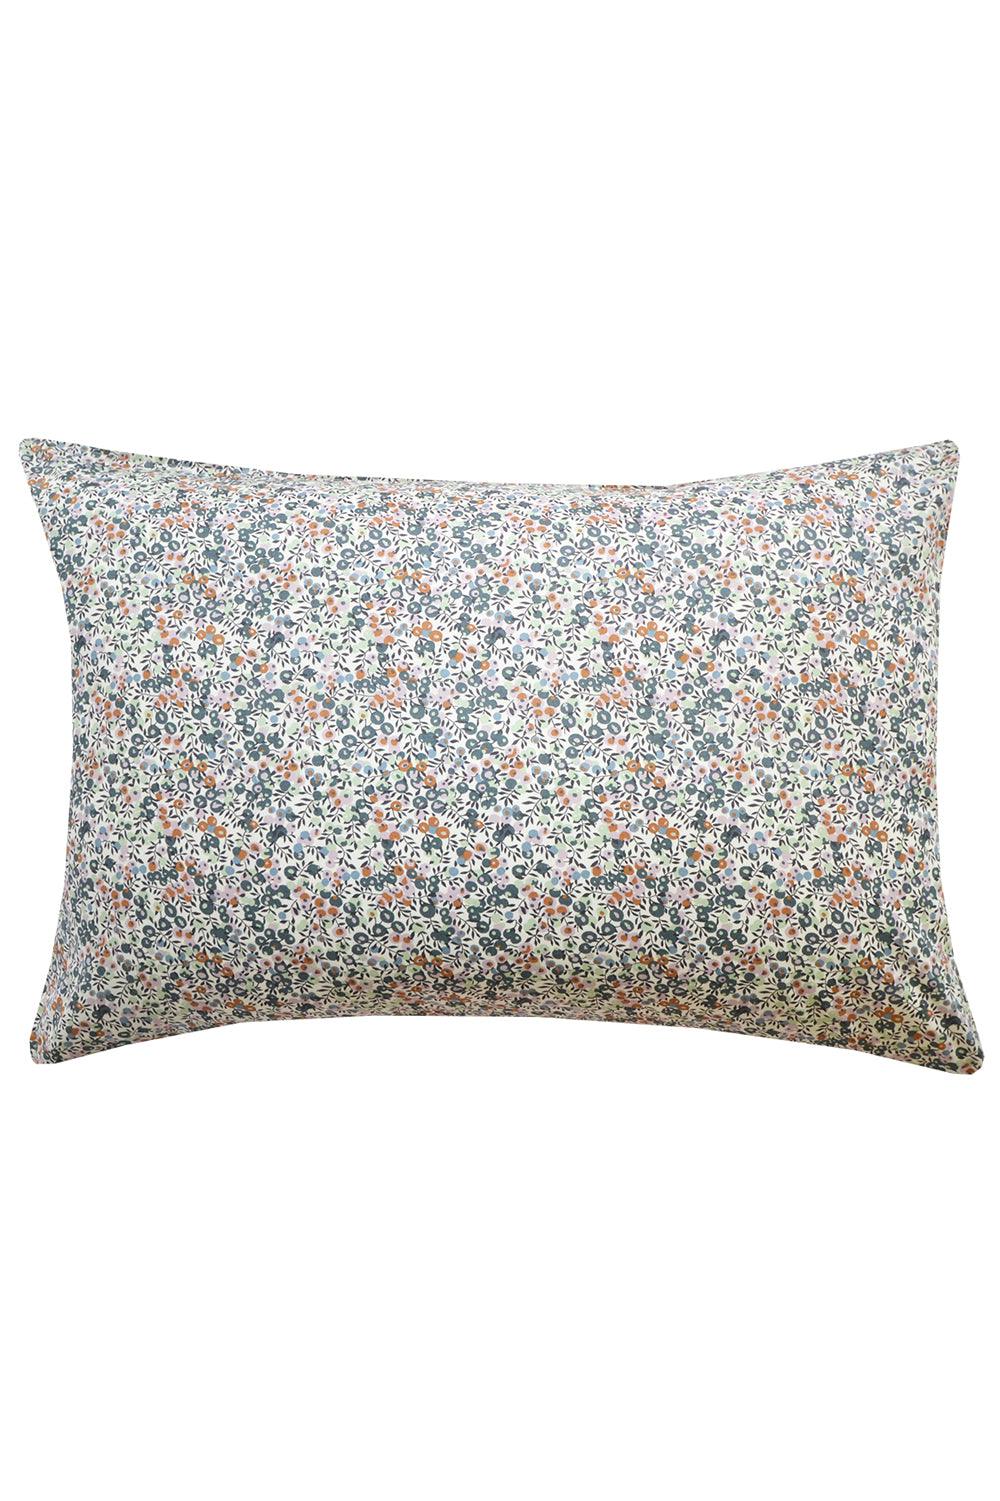 Pillowcase made with Organic Liberty Fabric WILTSHIRE - Coco & Wolf